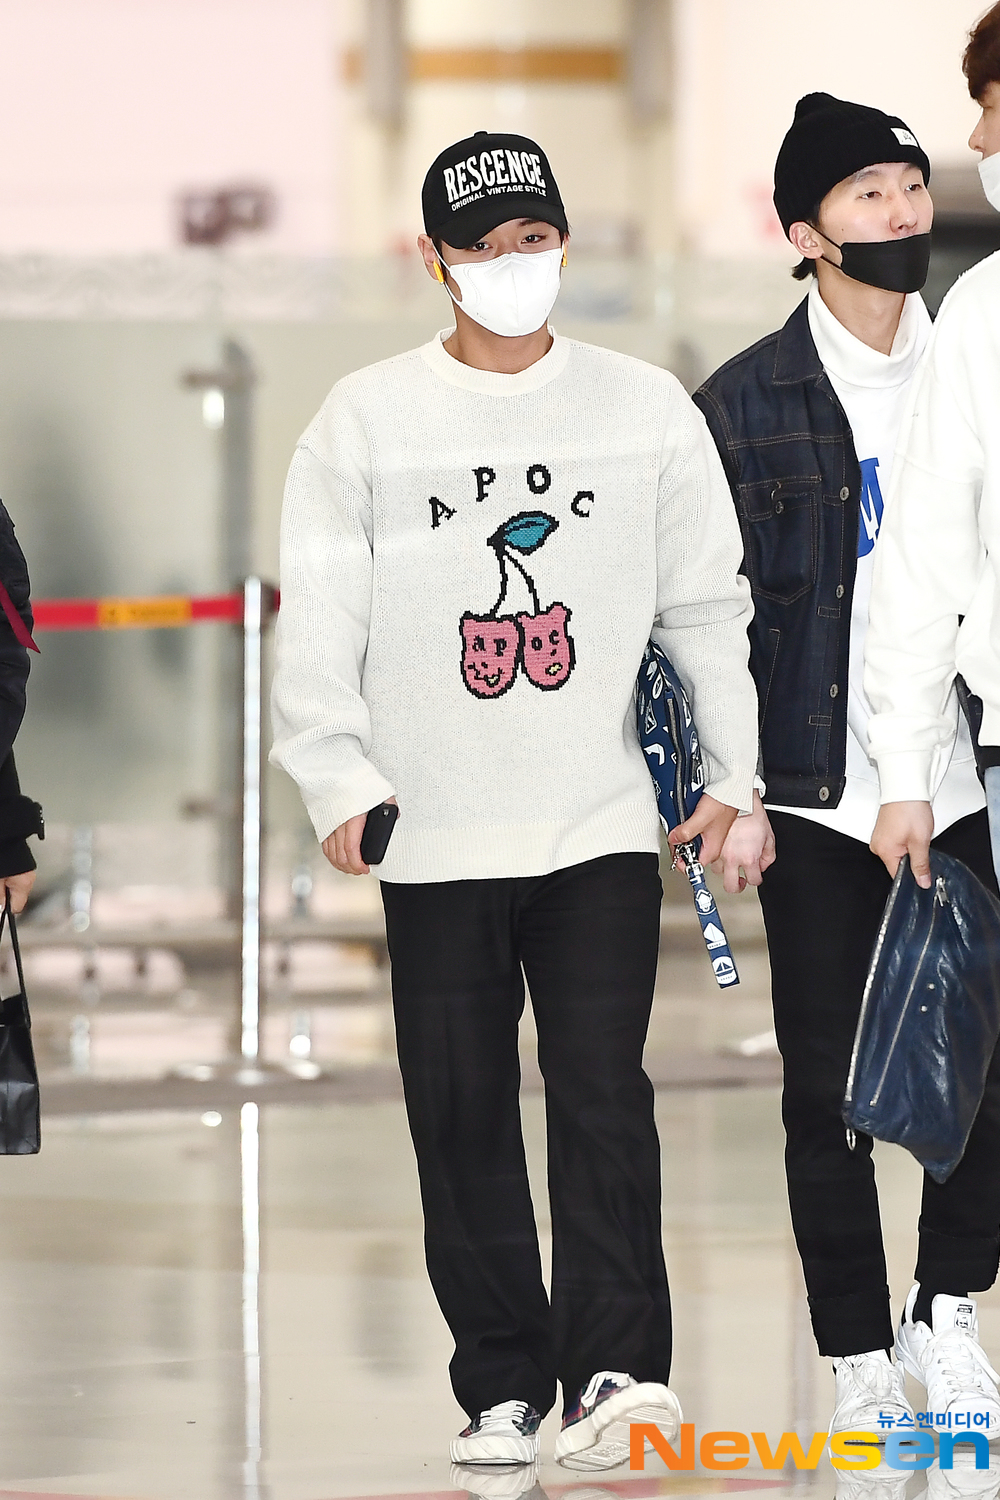 Former member of WANNAONE, Park Jihoon (PARKJIHOON), arrived in Japan after completing the schedule of 2019 PARK JIHOON ASIA FAN MEETING IN Japan -FIRST EDITION- held in Japan through Gimpo International Airport in Banghwa-dong, Gangseo-gu, Seoul on the afternoon of April 11.Singer Park Jihoon is entering the country.exponential earthquake